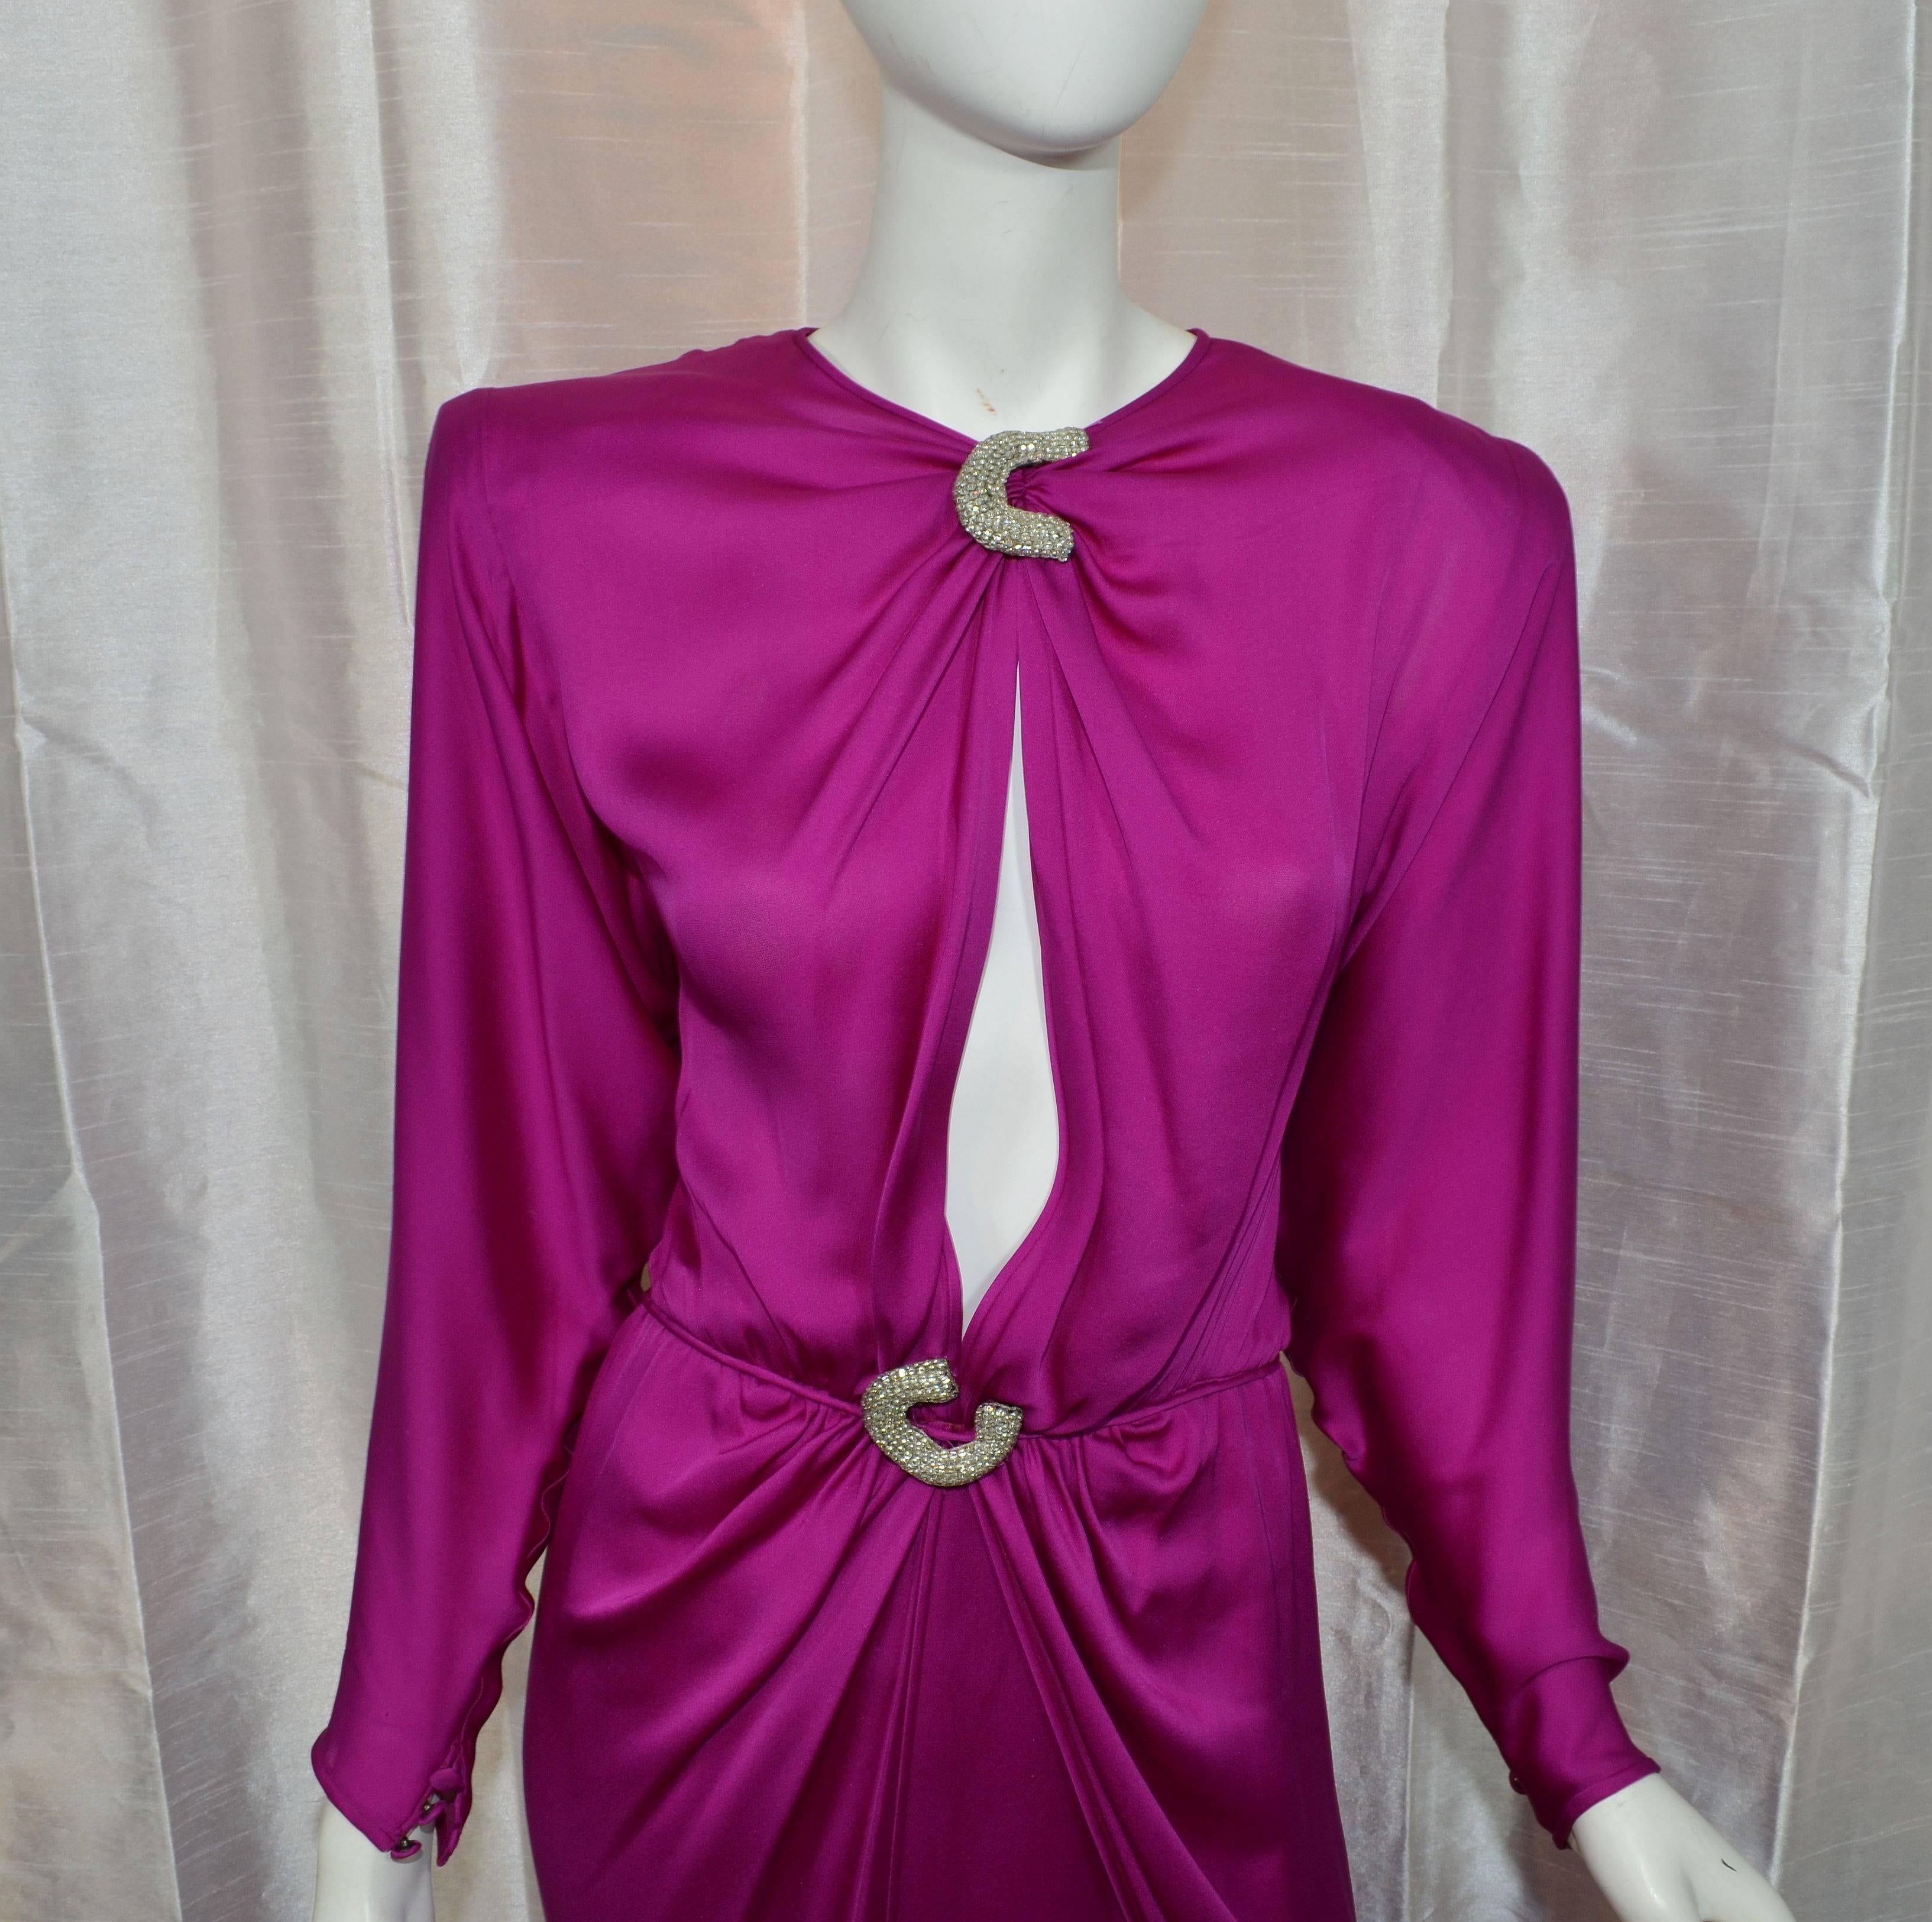 Valentino Satin Fuchsia Vintage 1980s Dress Embellished Keyhole Gown

Valentino gown featured in a fuchsia color on a satin fabric with a keyhole neckline, and a draped front. Dress has silver thread and mesh applique at the neck and waistline,